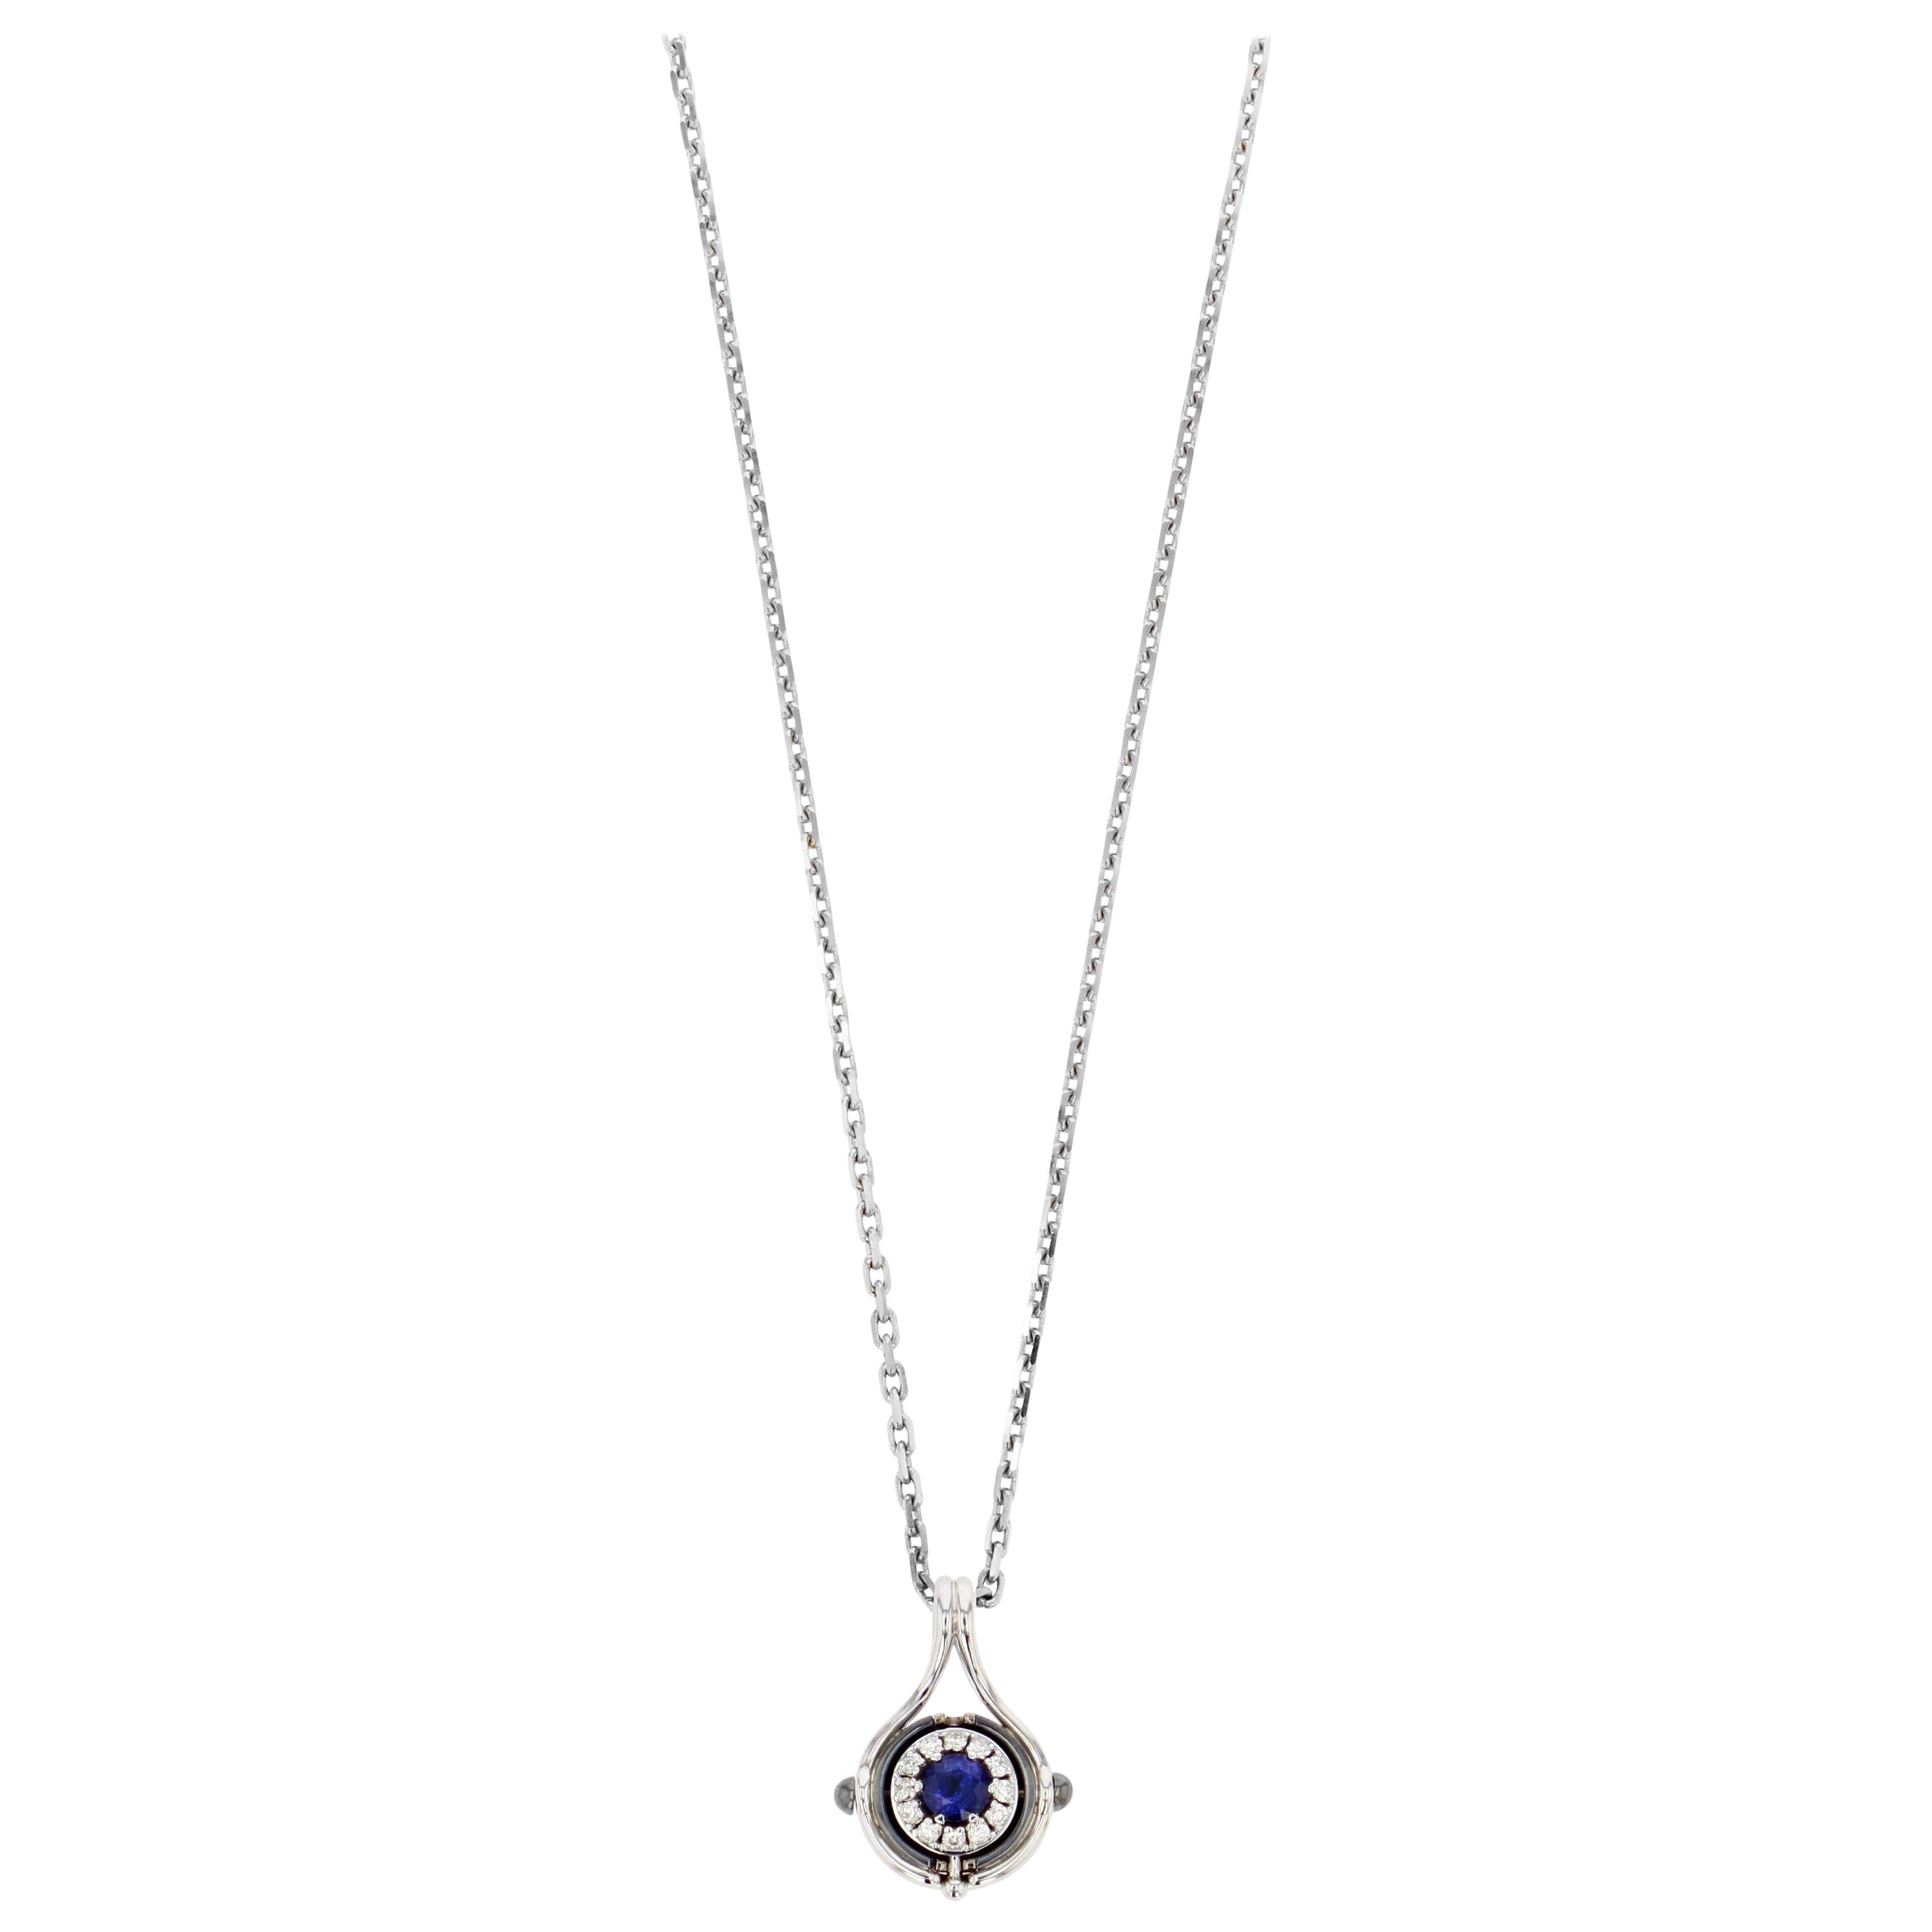 Blue Sapphire Diamonds Mira Pendant Necklace in 18k White Gold by Elie Top